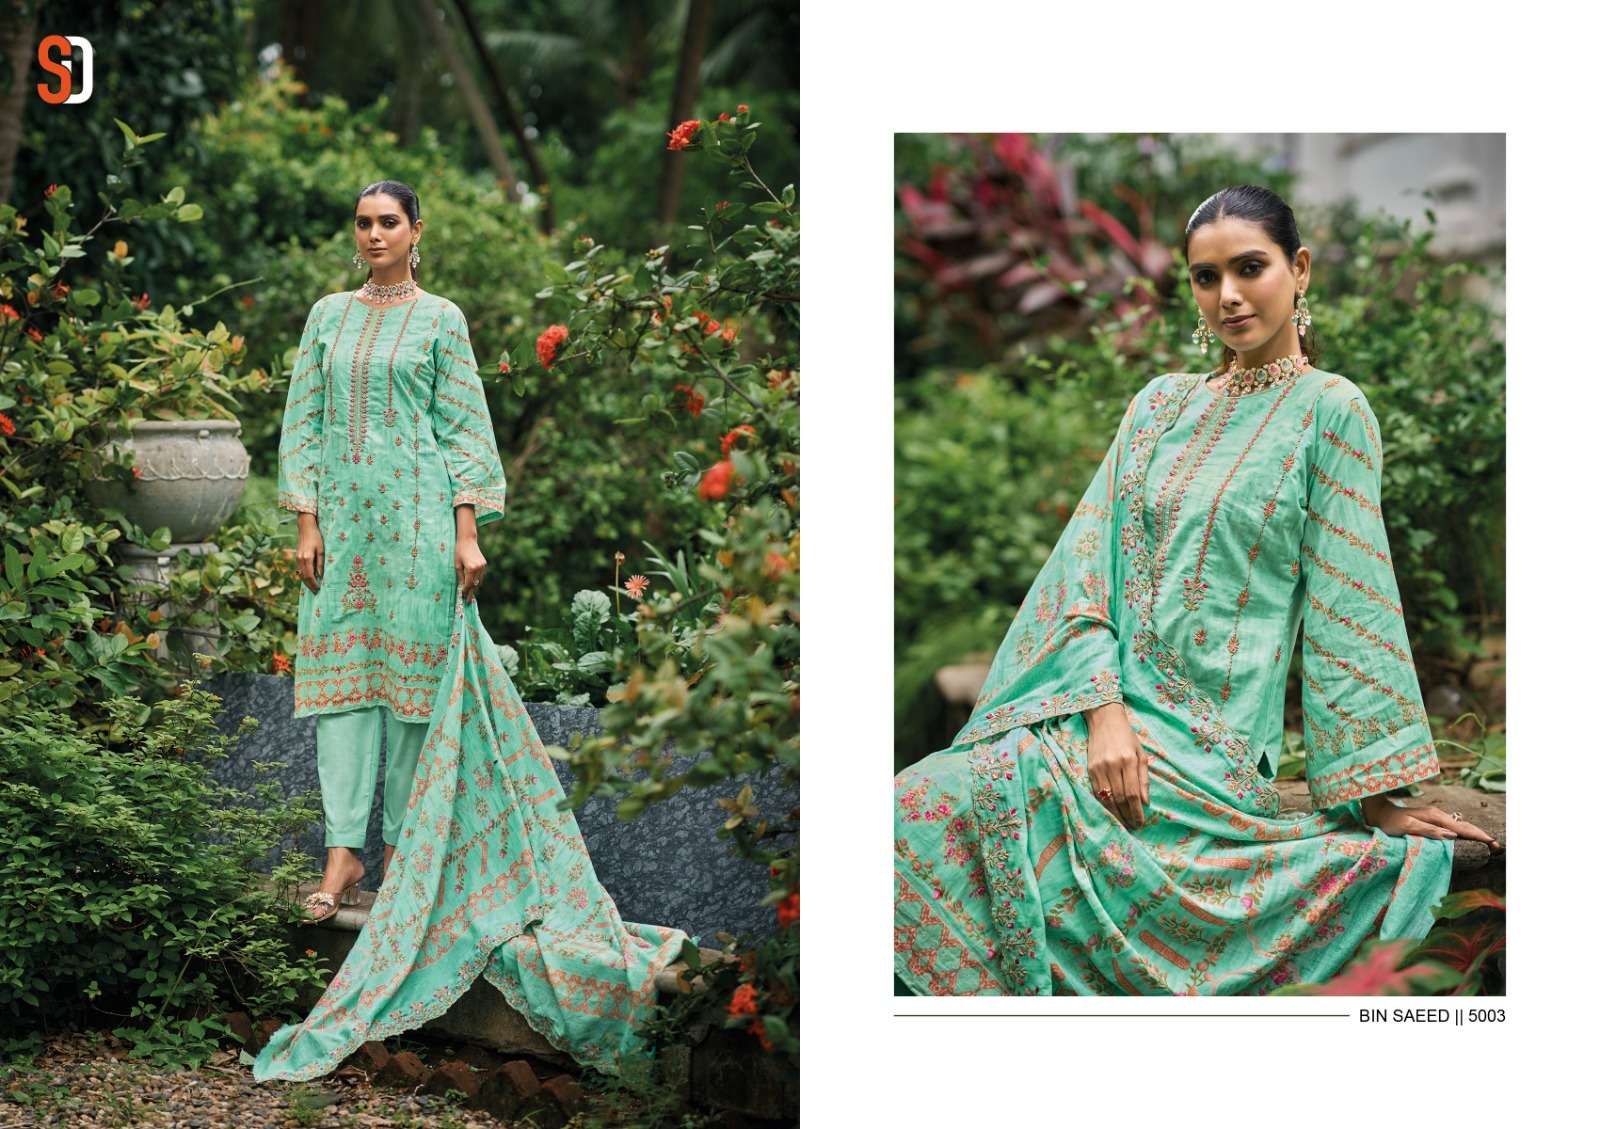 Bin Saeed Lawn Collection Vol-5 By Shraddha Designer 50001 To 50004 Series Designer Pakistani Suits Beautiful Fancy Stylish Colorful Party Wear & Occasional Wear Pure Cotton Print With Embroidery Dresses At Wholesale Price